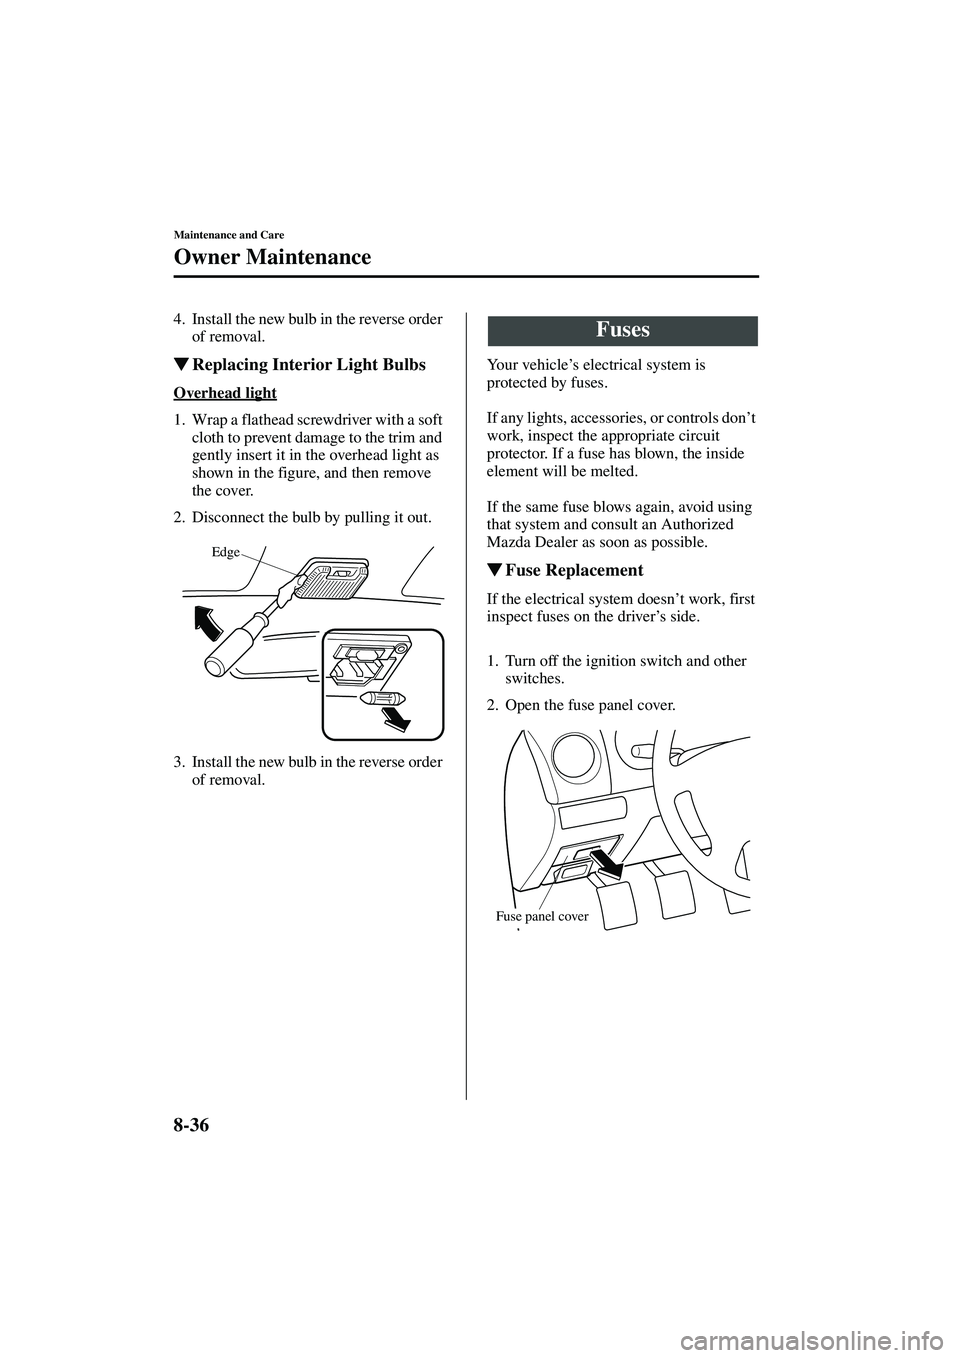 MAZDA MODEL MX-5 MIATA 2004  Owners Manual 8-36
Maintenance and Care
Owner Maintenance
Form No. 8S15-EA-03G
4. Install the new bulb in the reverse order of removal.
Replacing Interior Light Bulbs
Overhead light
1. Wrap a flathead screwdriver 